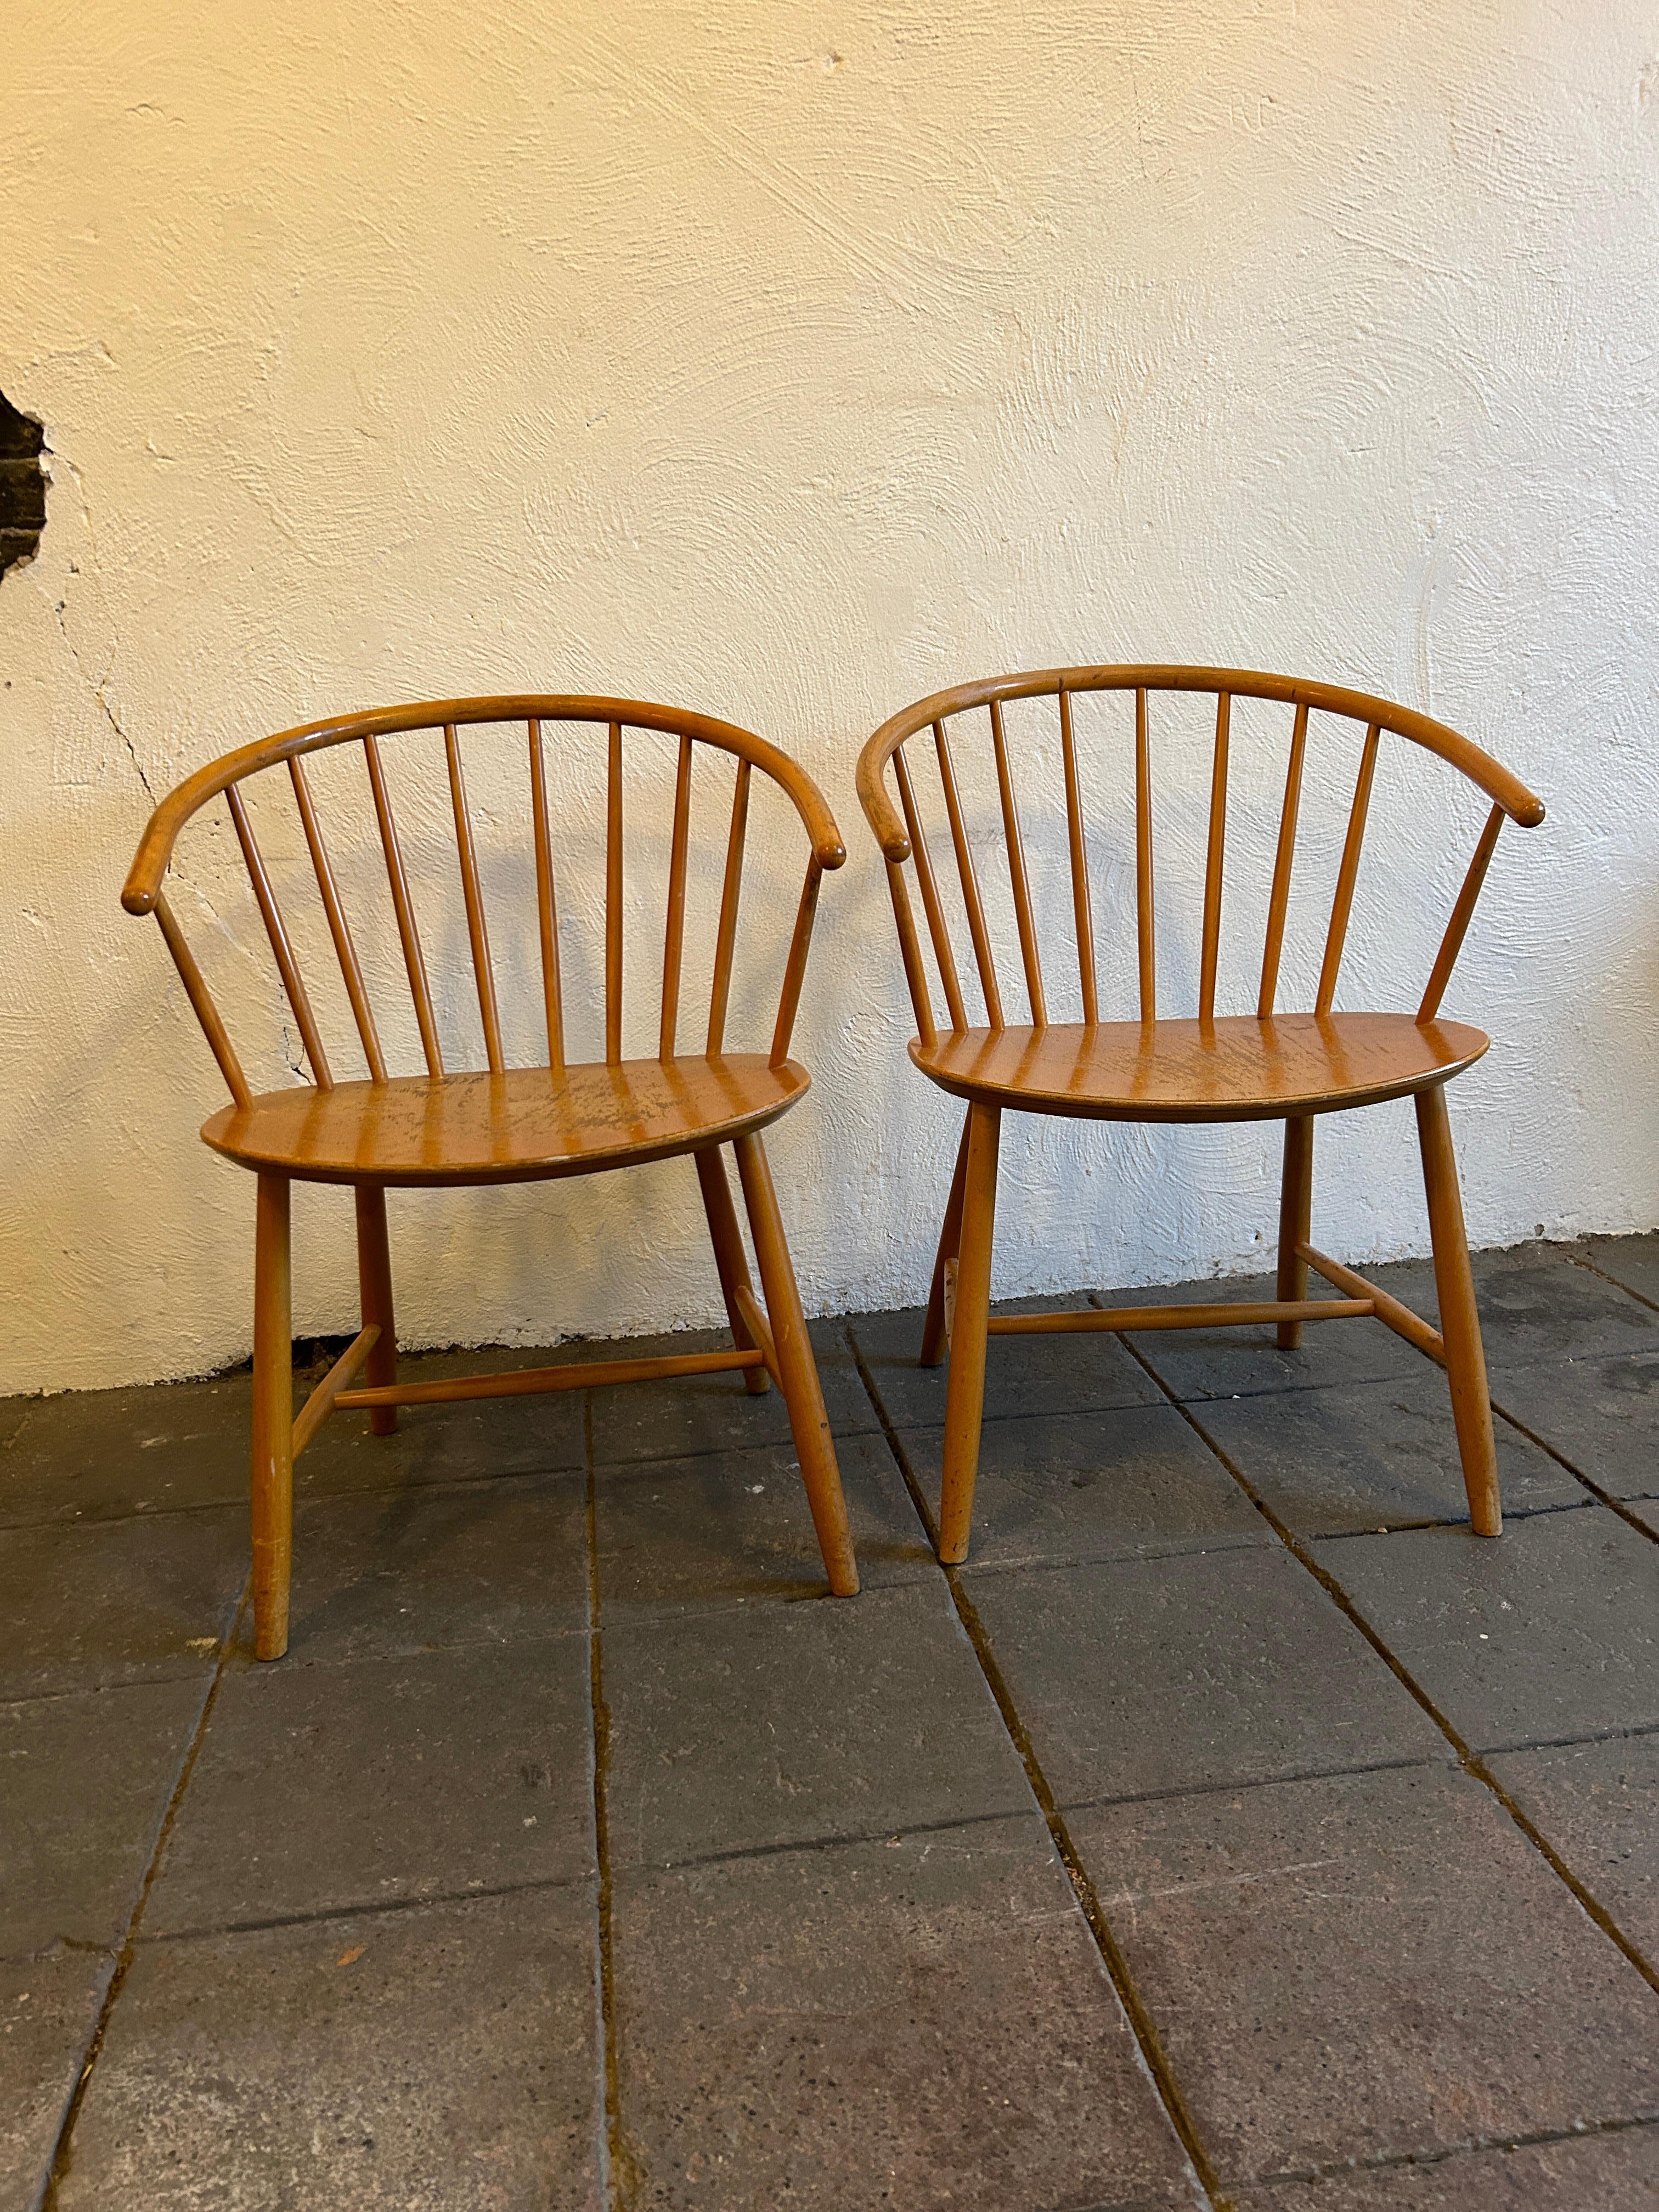 
Pair of vintage Ejvind A. Johansson J64 Side chairs for FDB Mobler. Mid 20th century. Windsor-style armchairs with bentwood arms, splats, and legs. FDB logo stamps, brand marks, and Made in Denmark impressed into undersides of both chairs. Wear and